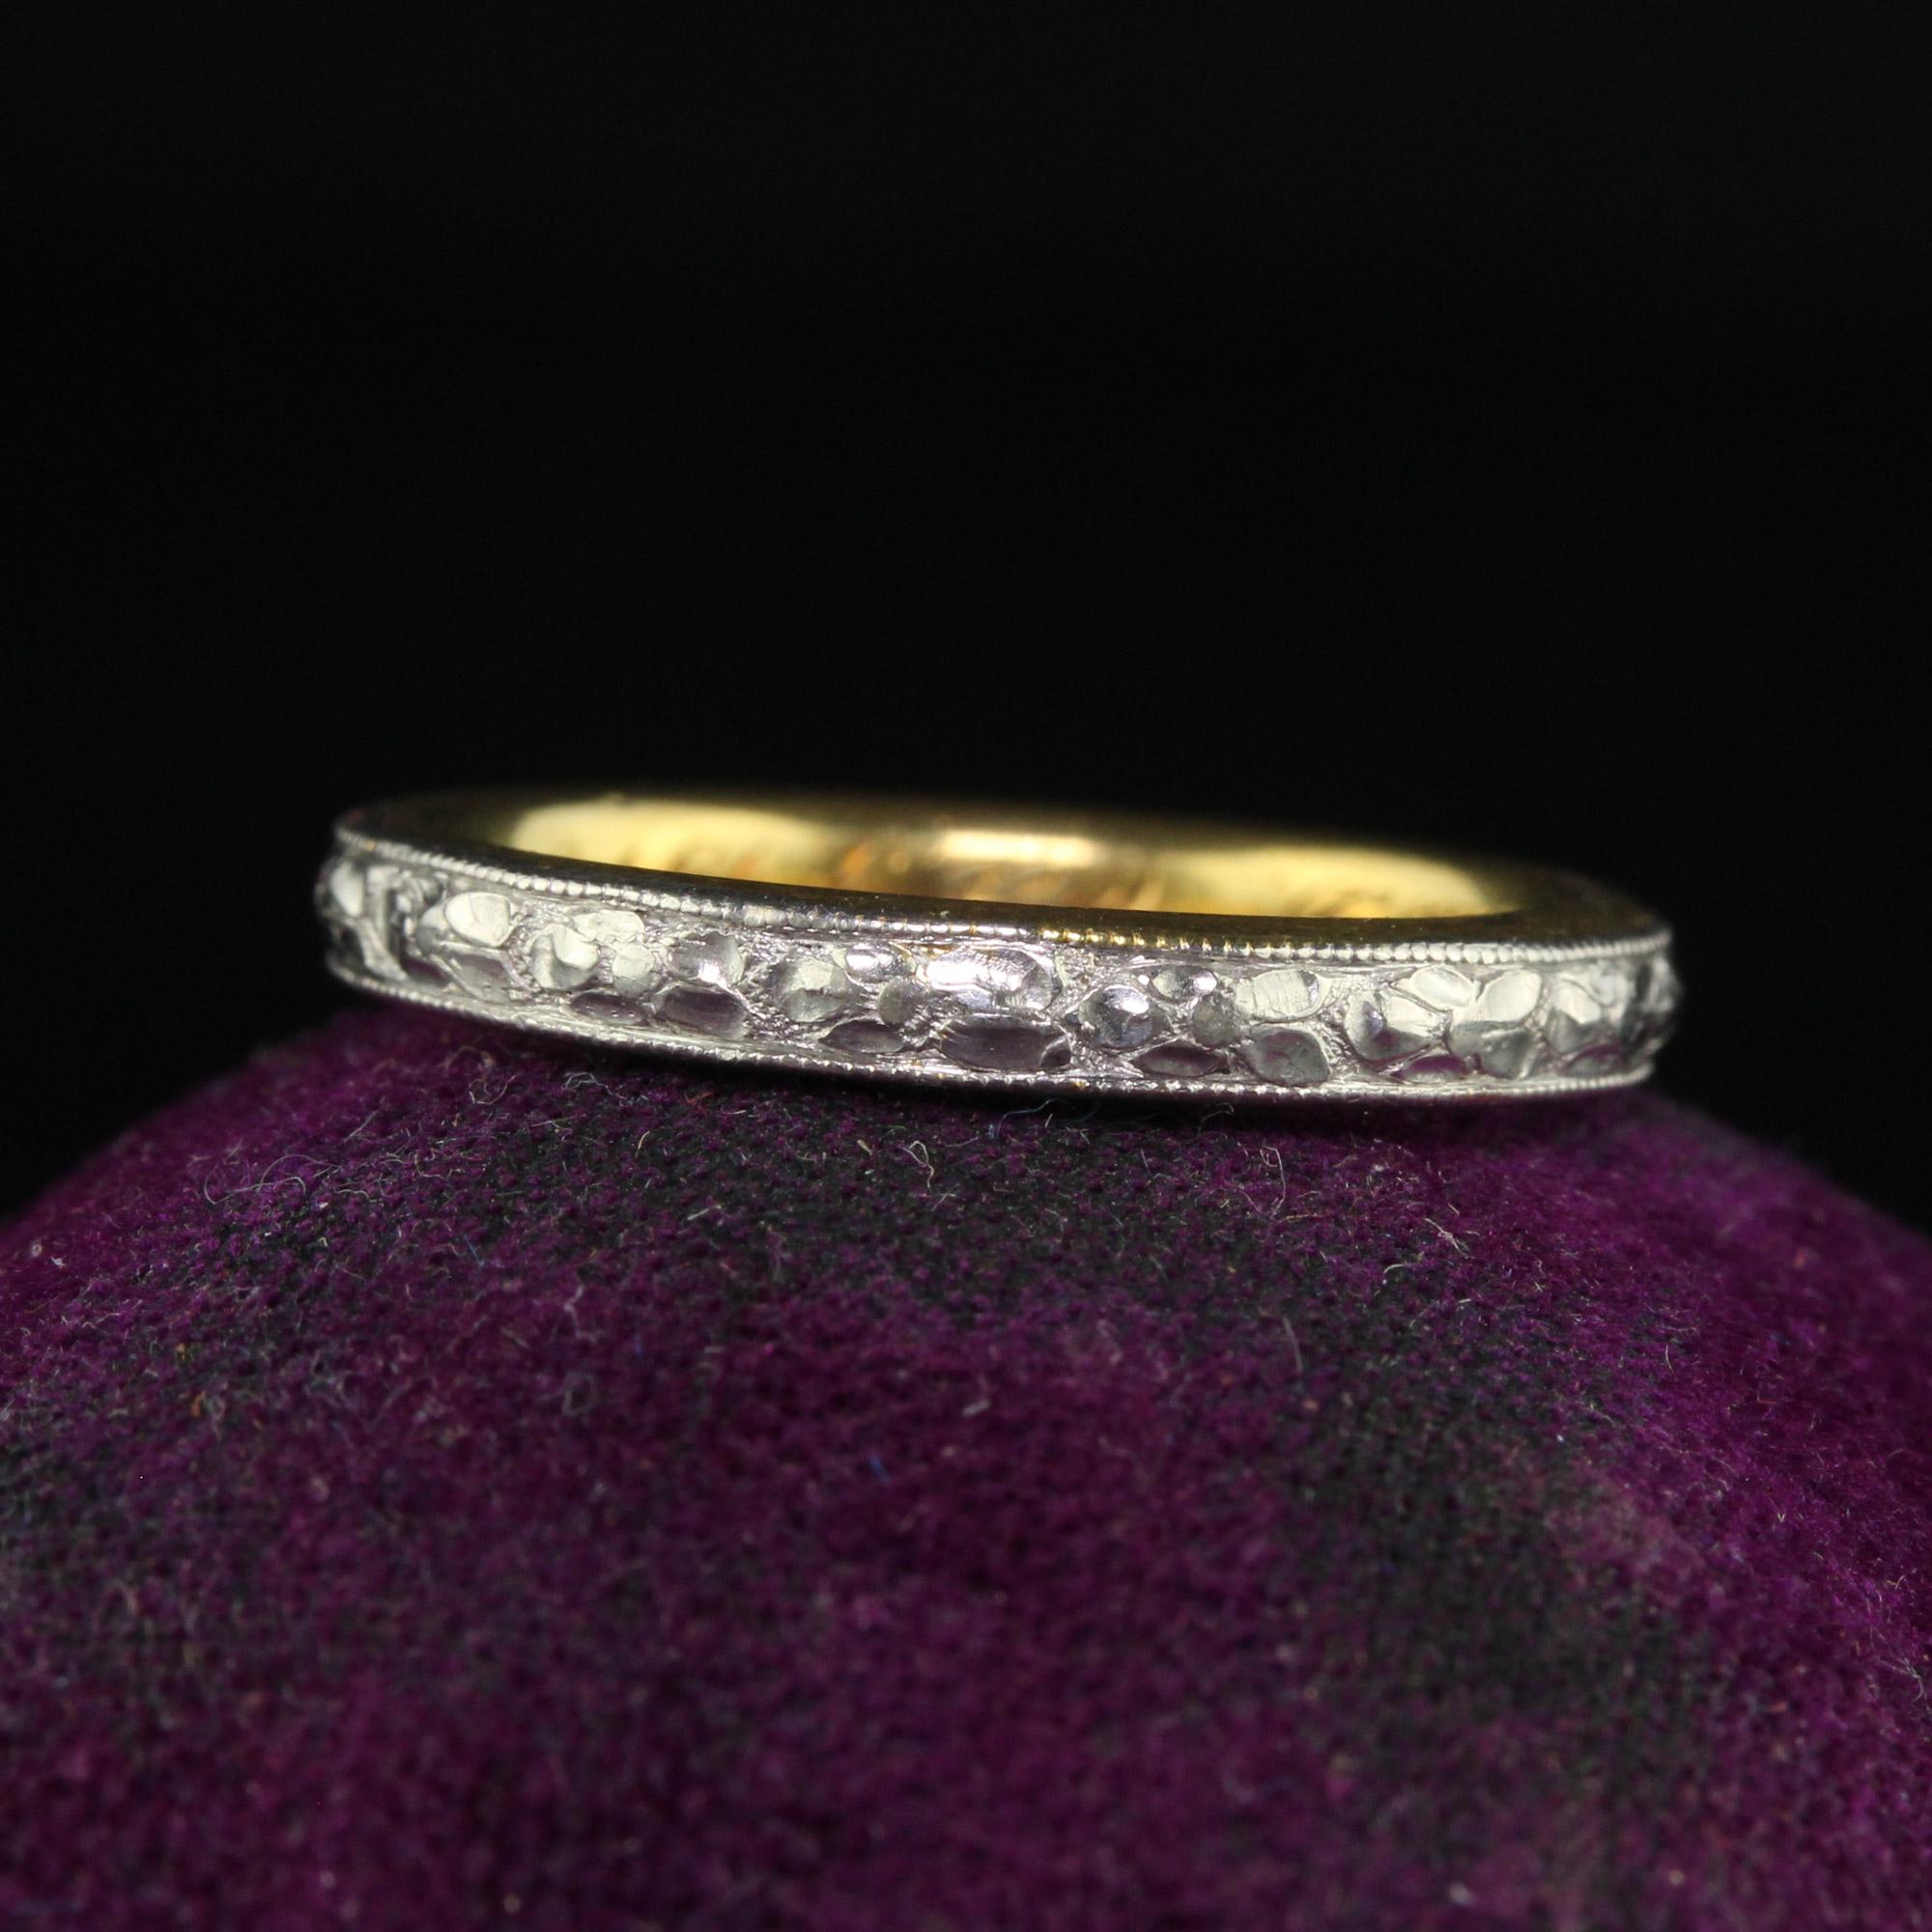 Beautiful Antique Art Deco Platinum and 18K Gold Engraved Wedding Band Circa 1917 - Size 5 1/2. This gorgeous wedding band is crafted in 18k yellow gold and platinum. The floral engravings go around the entire ring and are in crisp condition. The